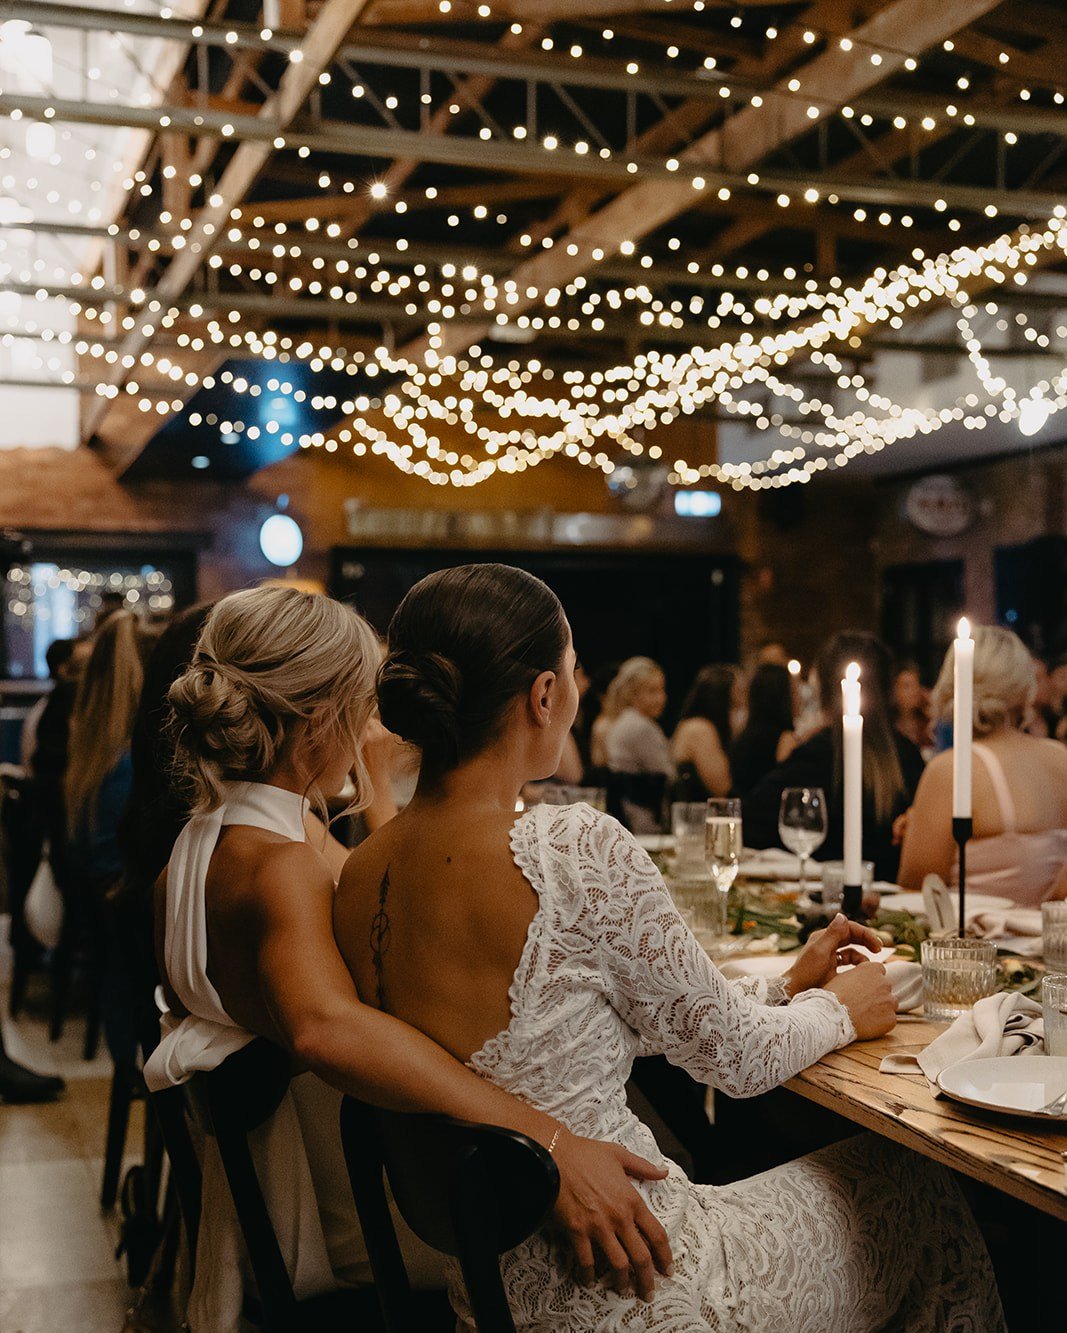 Adore adore adore the styling from Kate &amp; Ellies wedding - fairy lights are very much in at the moment. So dreamy. 

Photography: @lovegoodimages 

.
.
.
.
.
.
#weddingvenuemelbourne #weddingplanningmelbourne #melbourneweddinginspiration #melbour